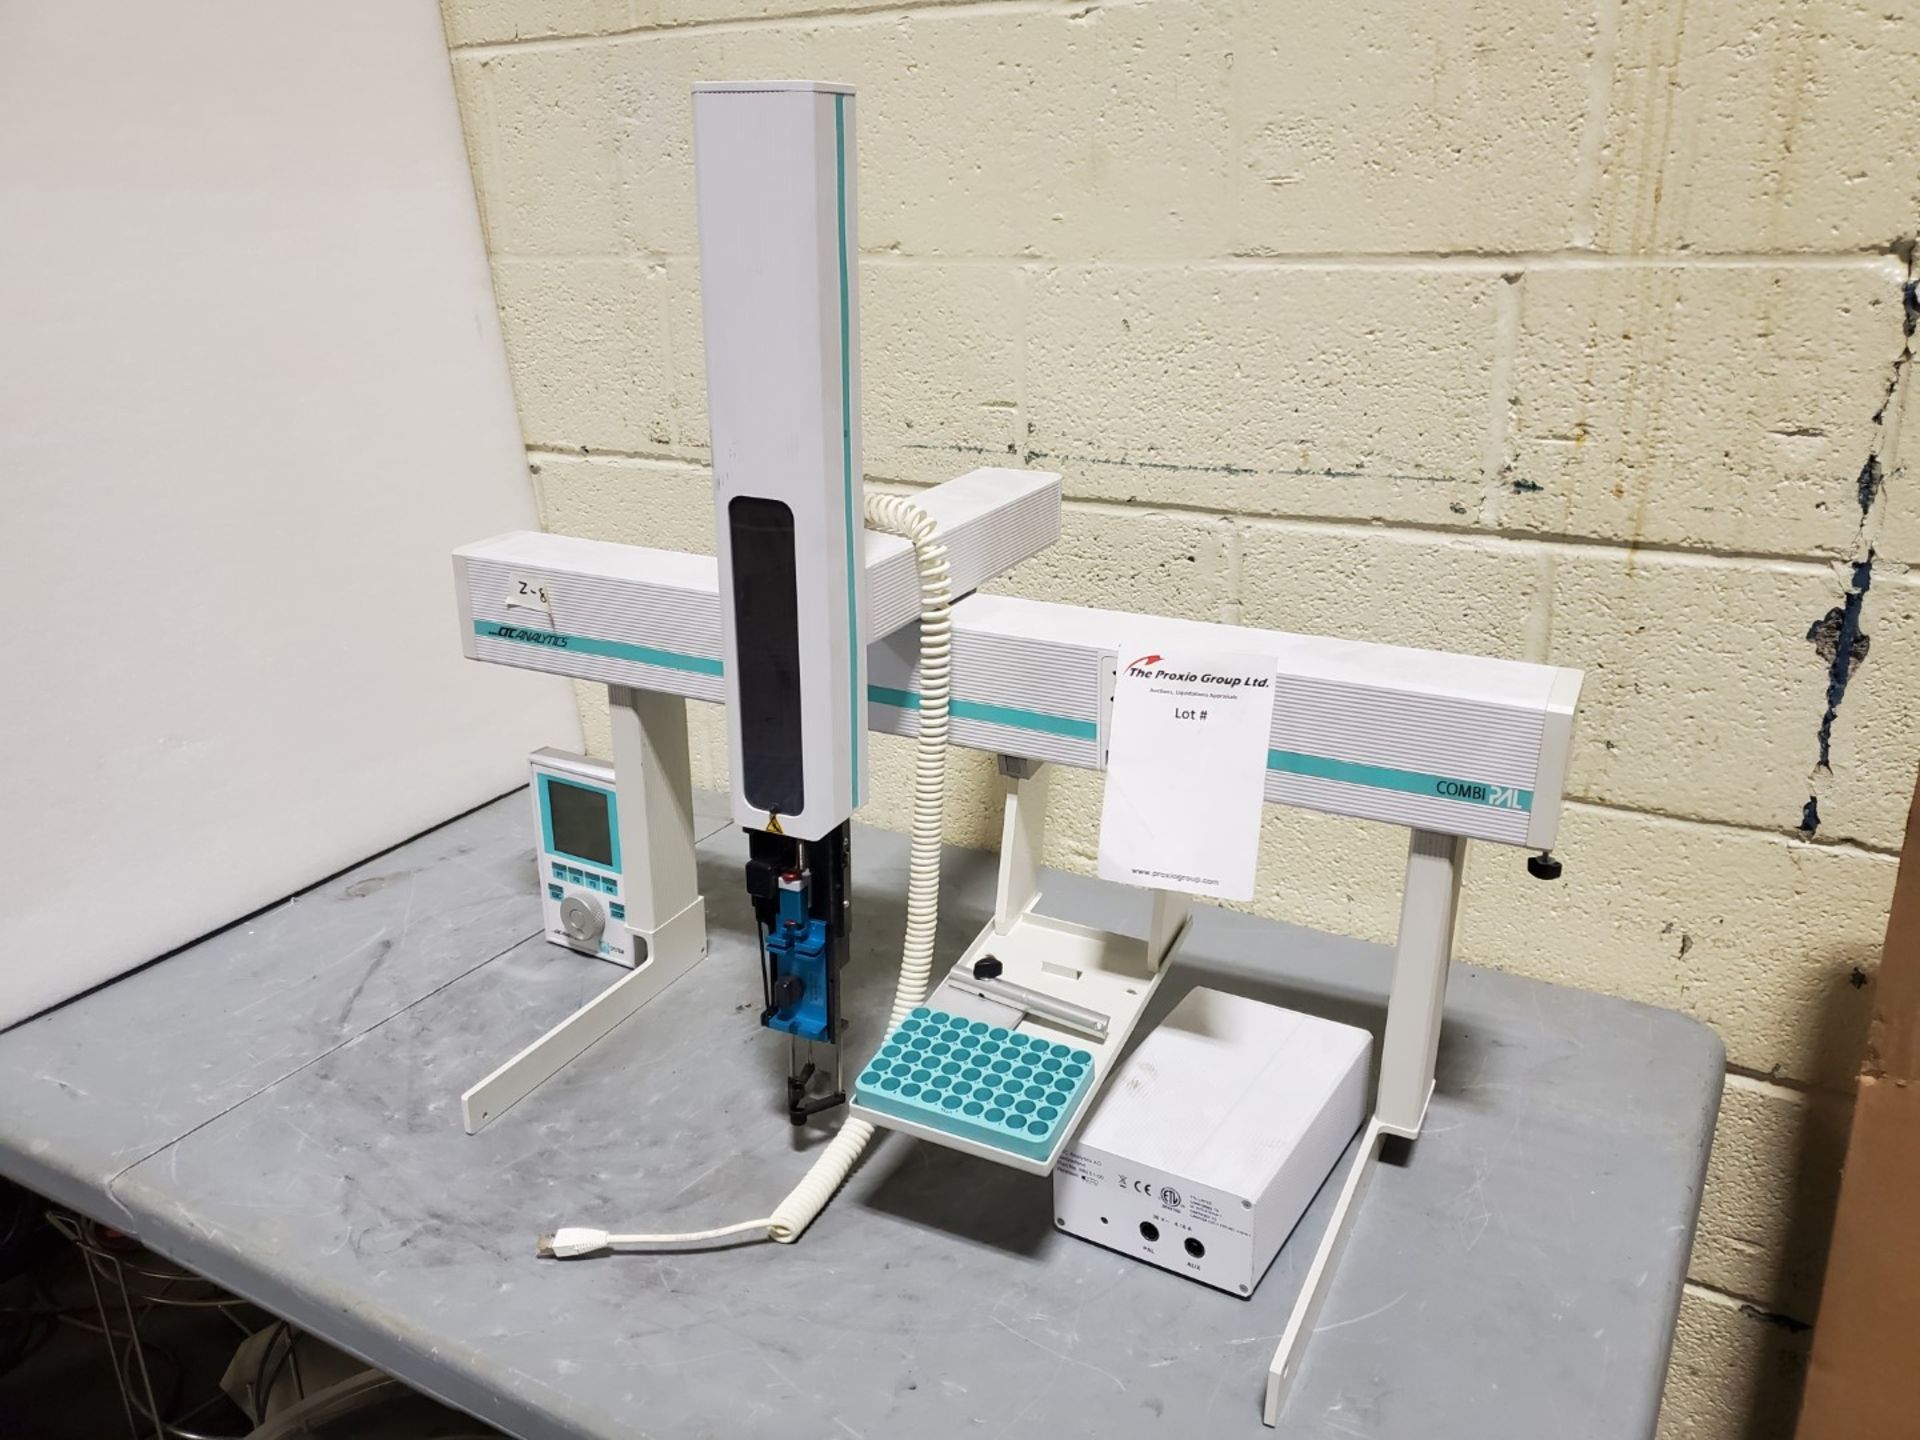 Agilent Technologies CTC Analytic combipal Autosampler, with serial# 1212155. (TAG # 1200082)